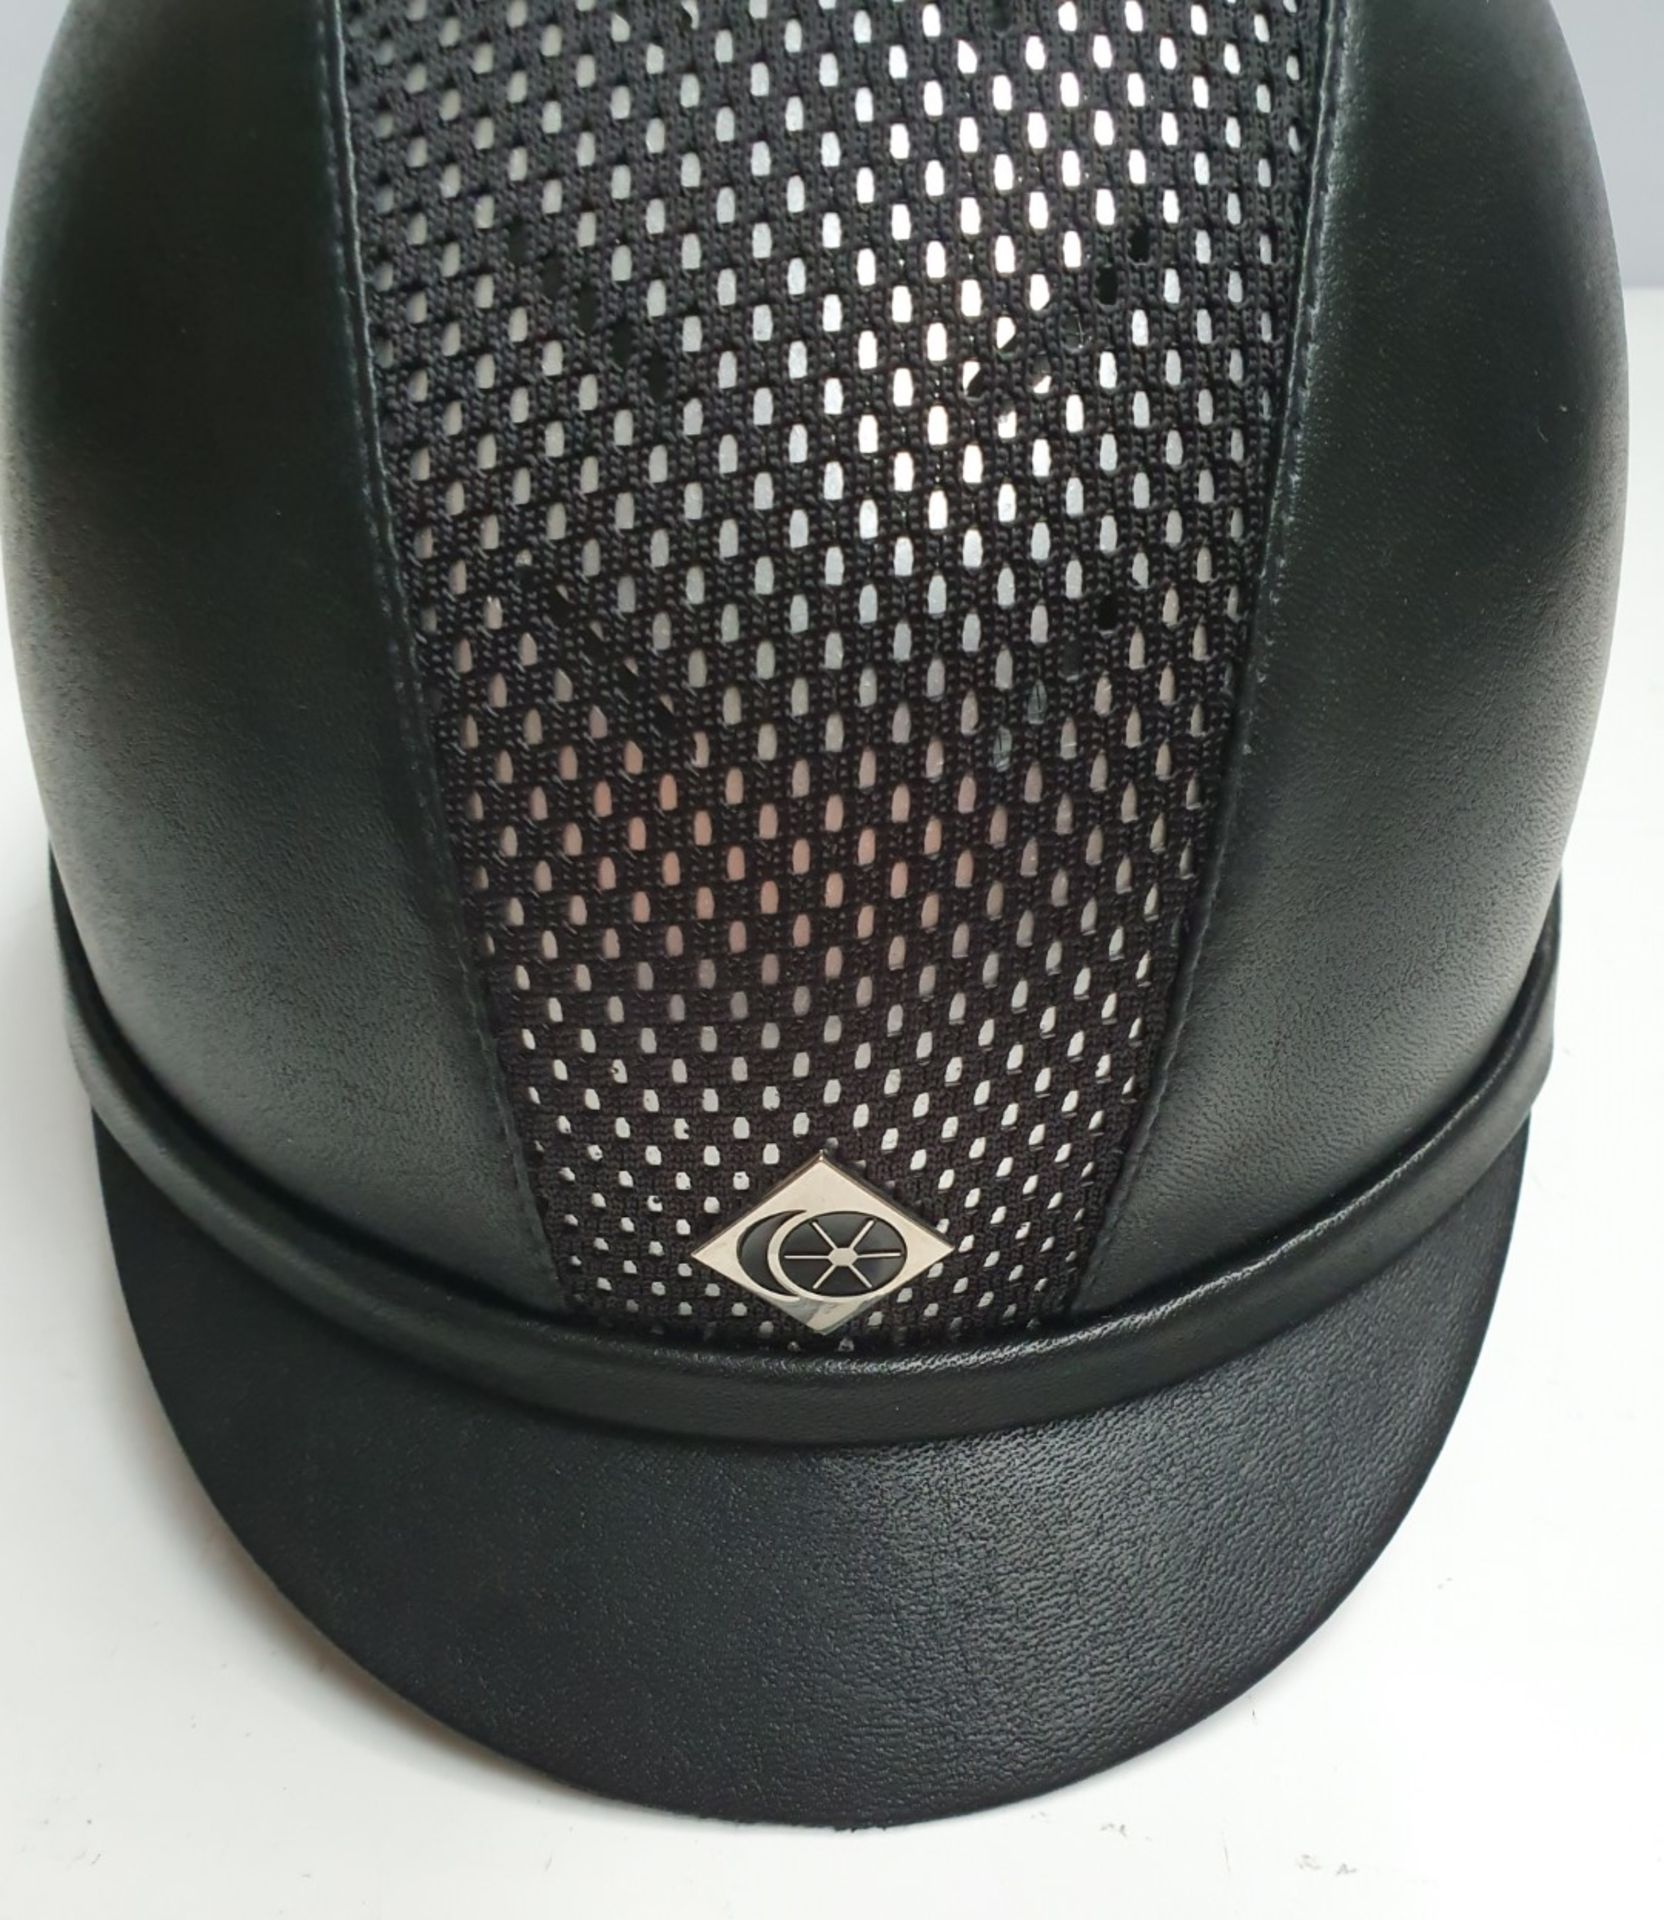 1 x Charles and Owen Horse Riding Helmet in Black / Silver and Mesh - Size 54cm - Ref722 - CL401 - B - Bild 2 aus 12